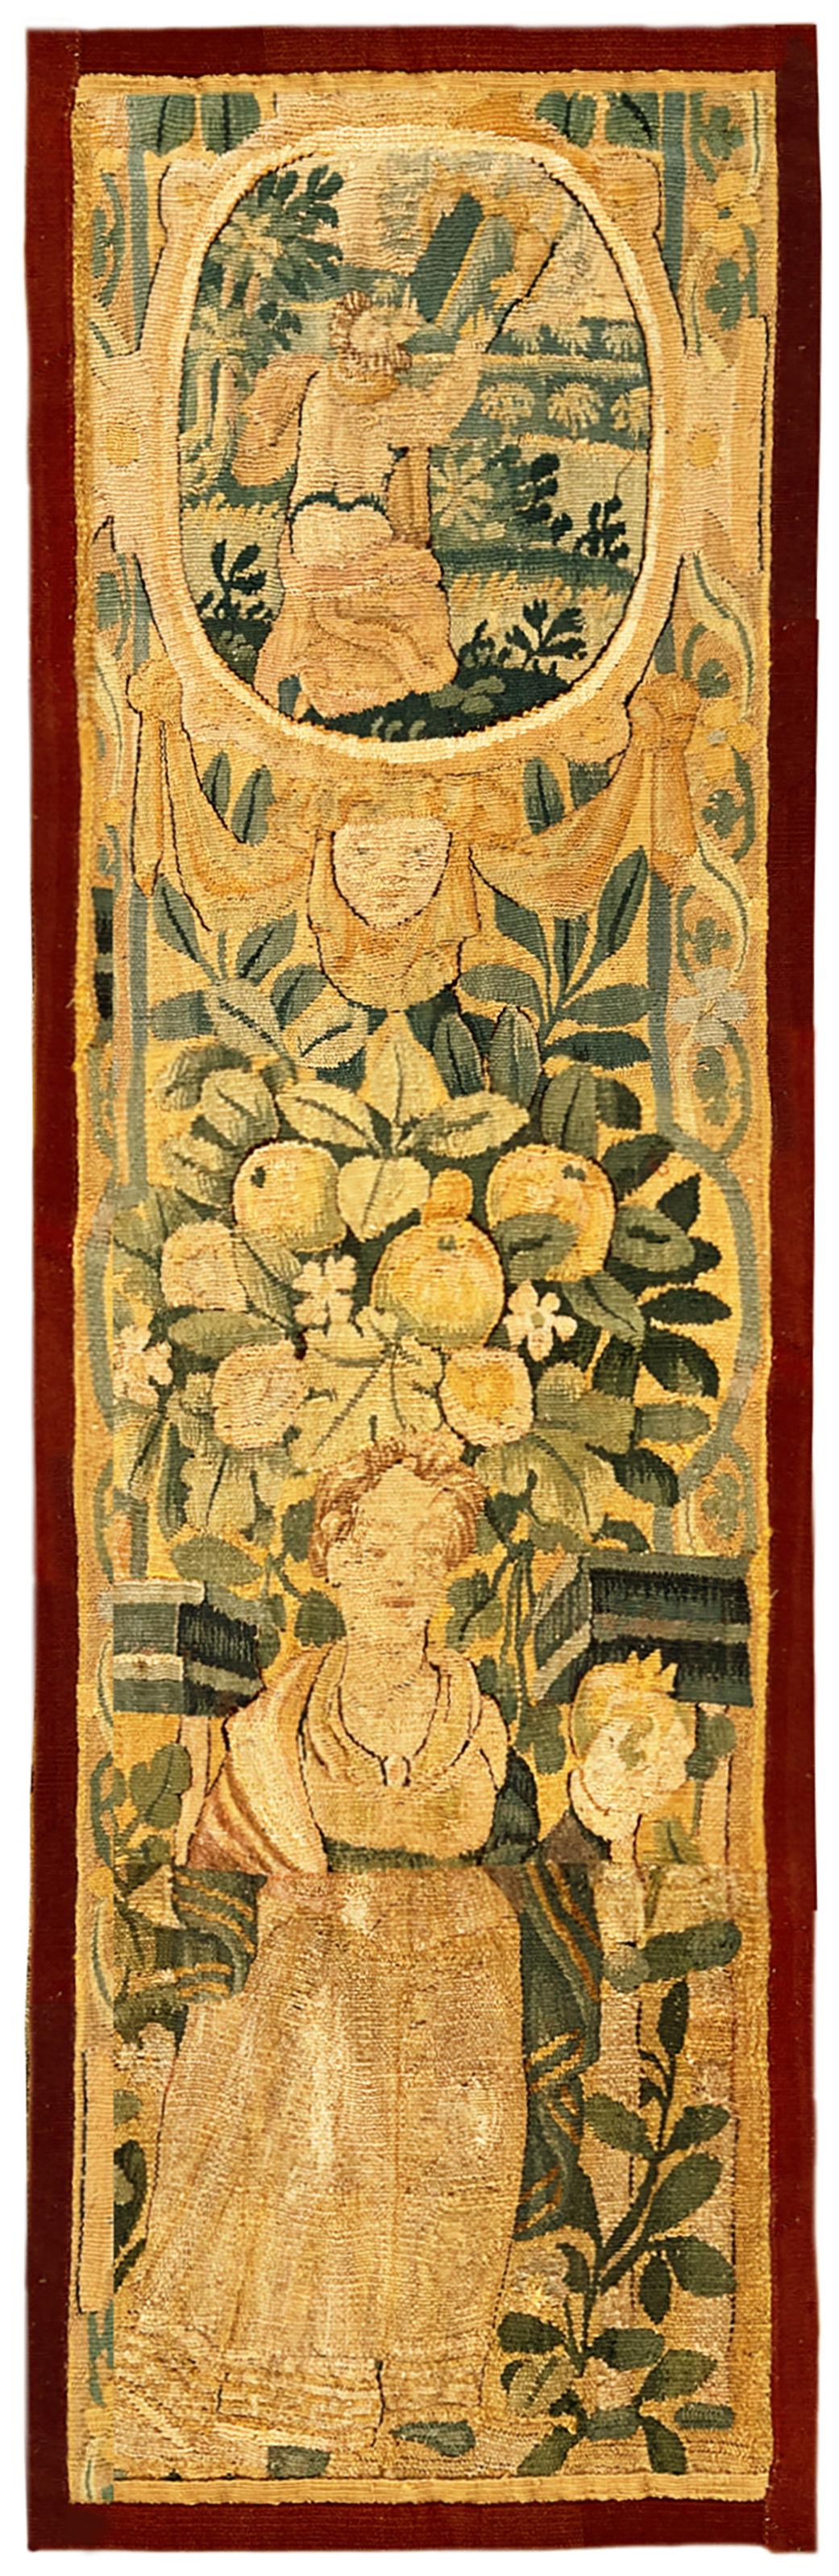 17th Century Flemish Historical Tapestry Panel, with Female Figures, Vertical